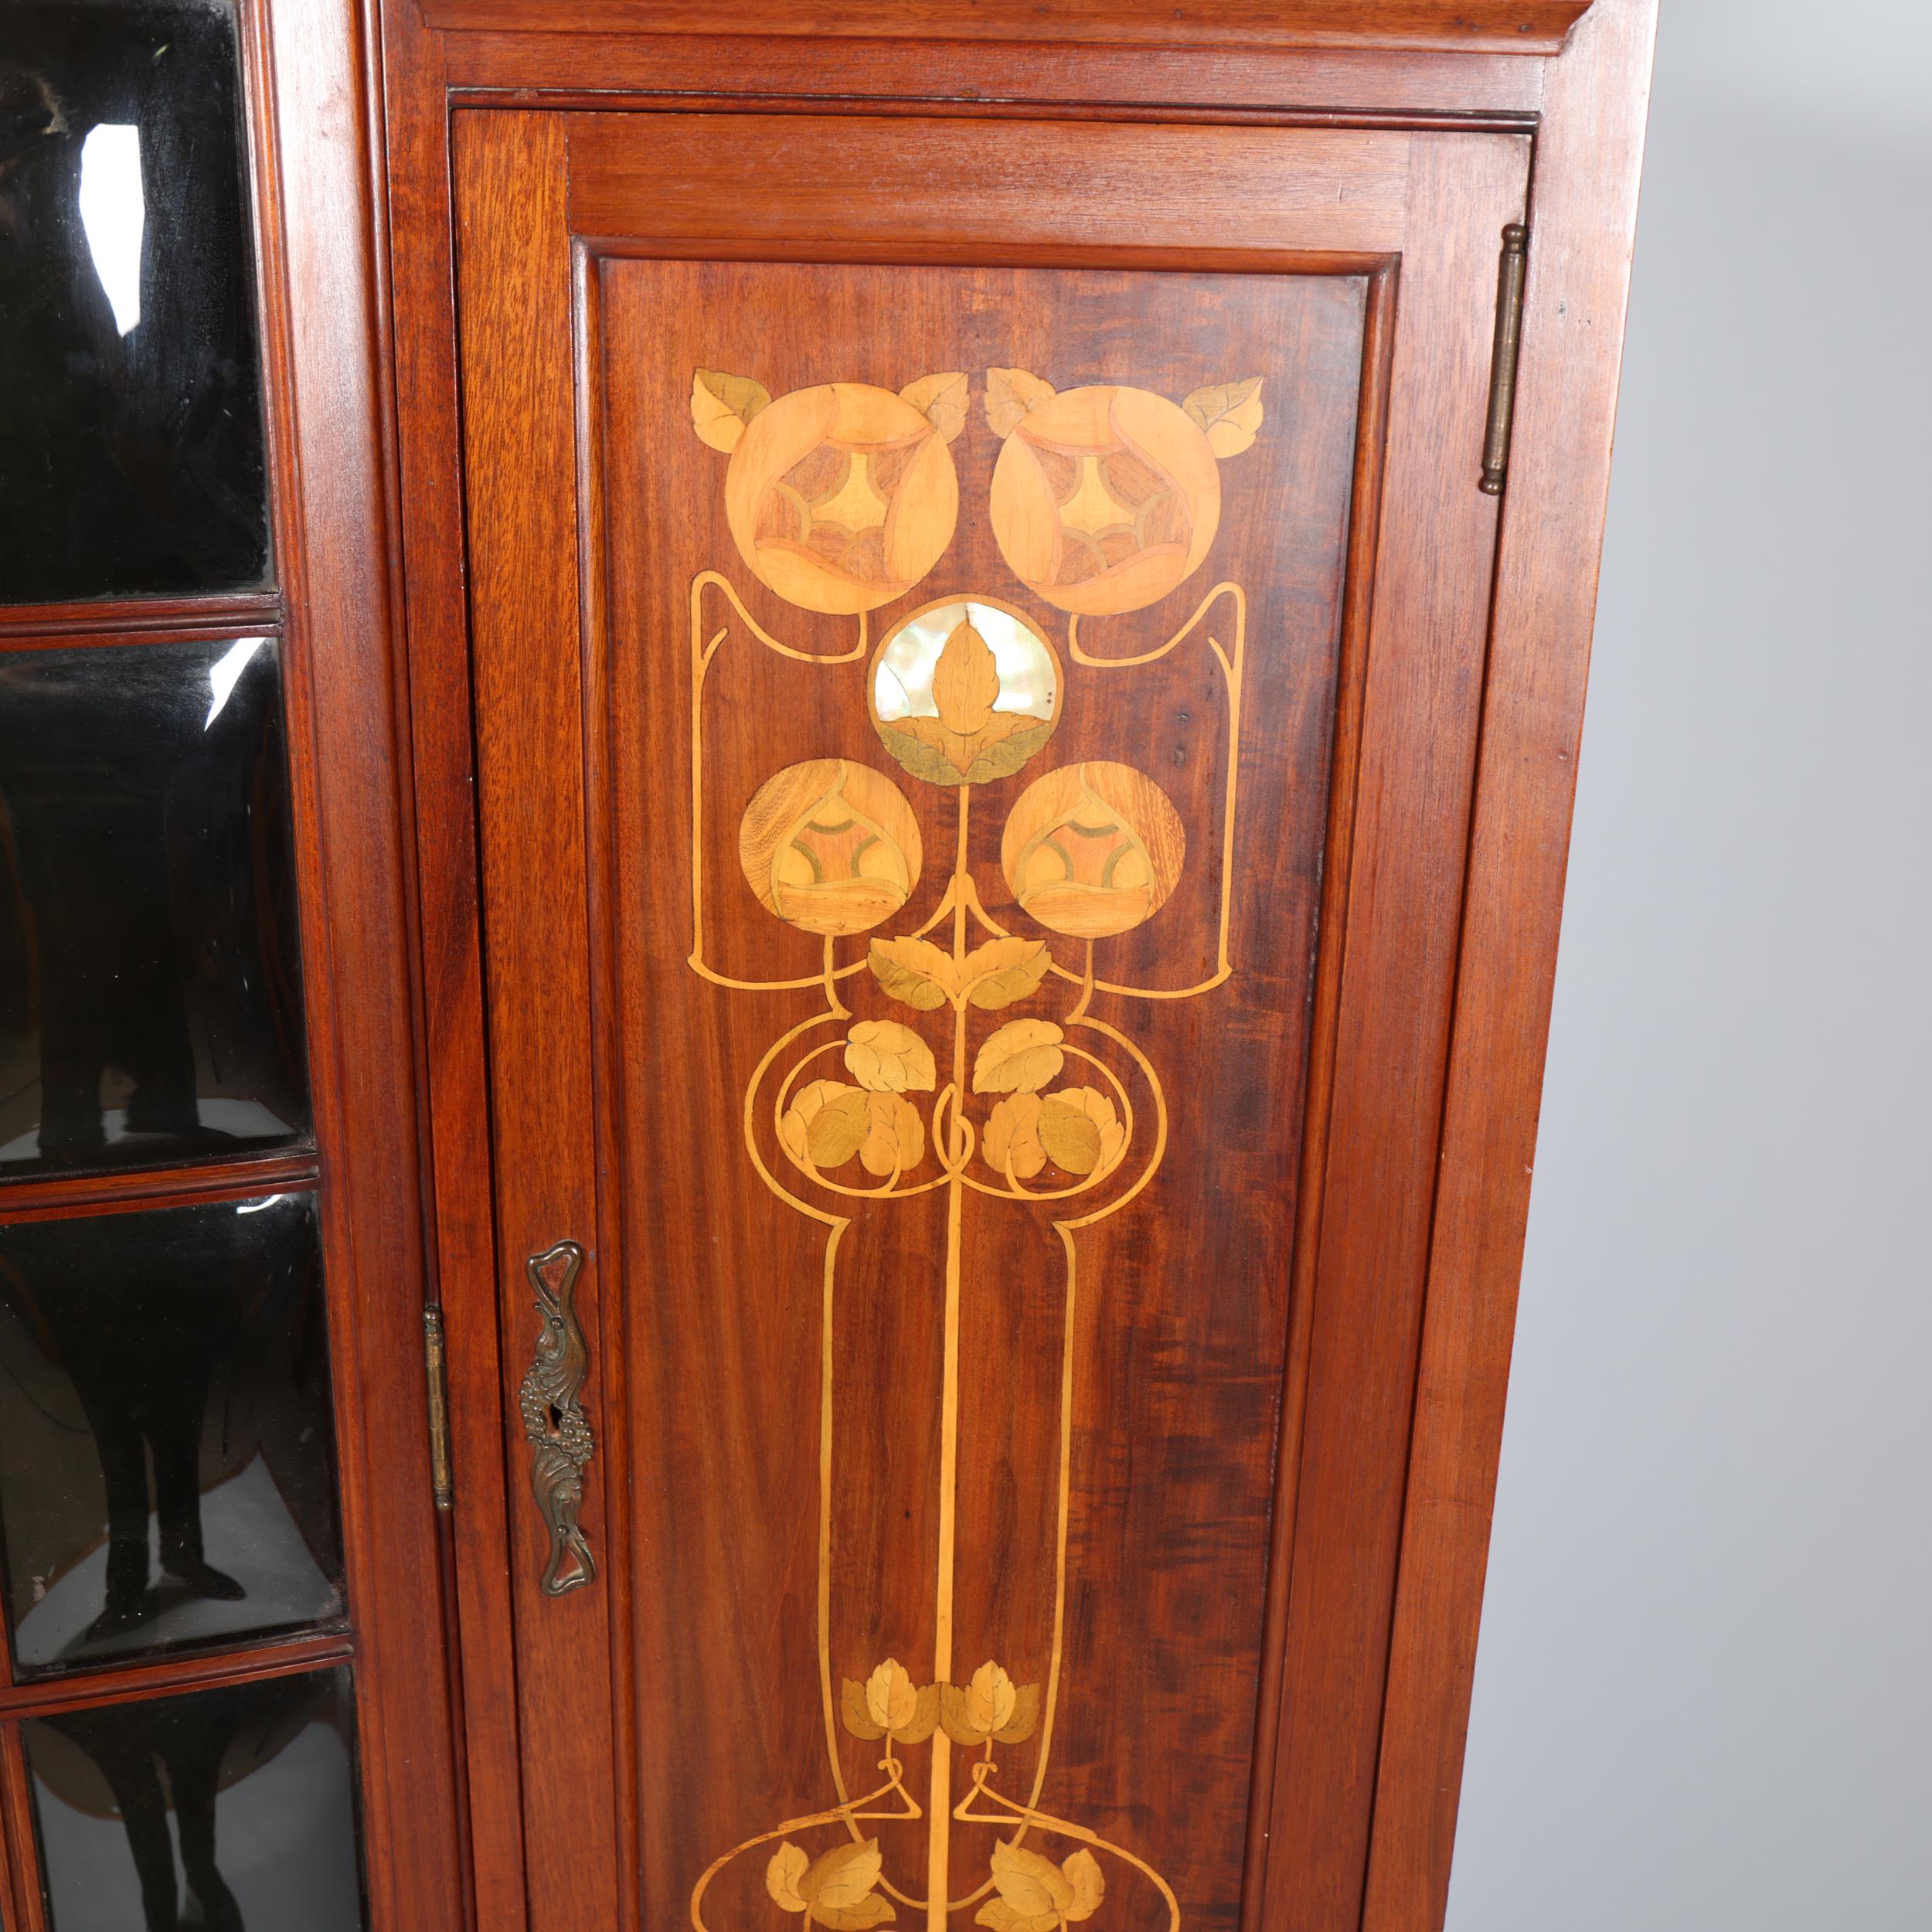 Shapland & Petter, an Art Nouveau mahogany display cabinet, 2 central doors with bow-glass panels - Image 6 of 11